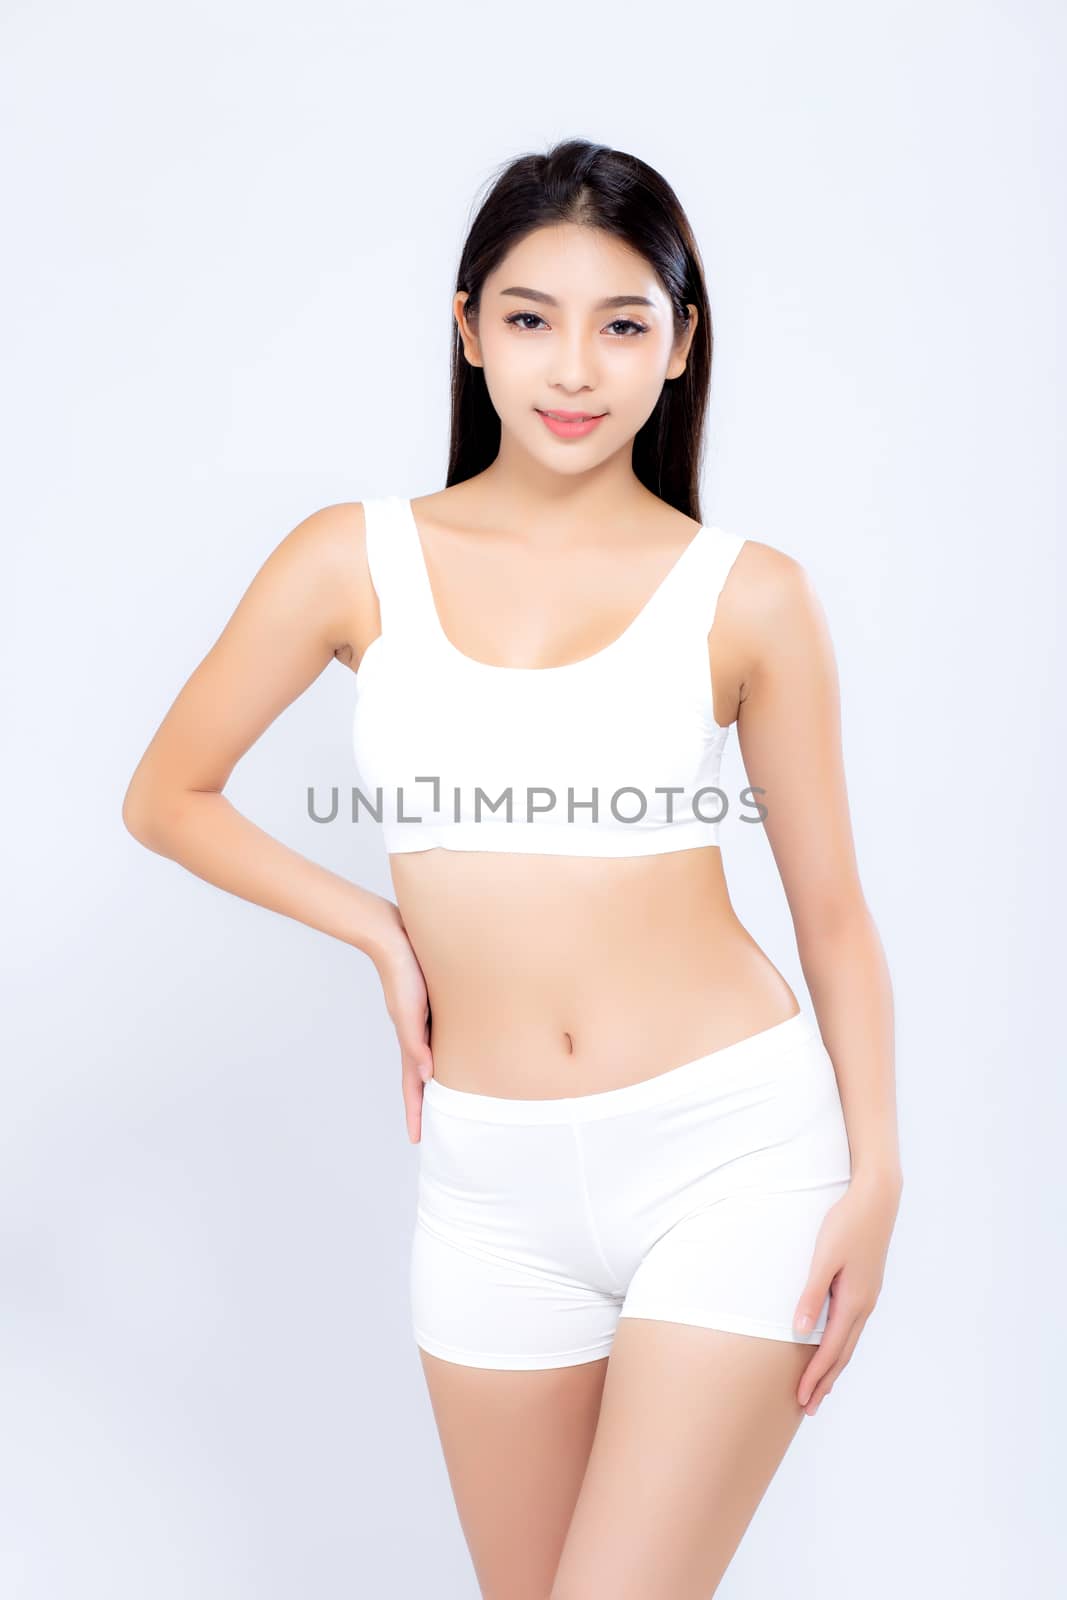 Portrait young asian woman smiling beautiful body diet with fit isolated on white background, model girl weight slim with cellulite or calories, health and wellness concept.